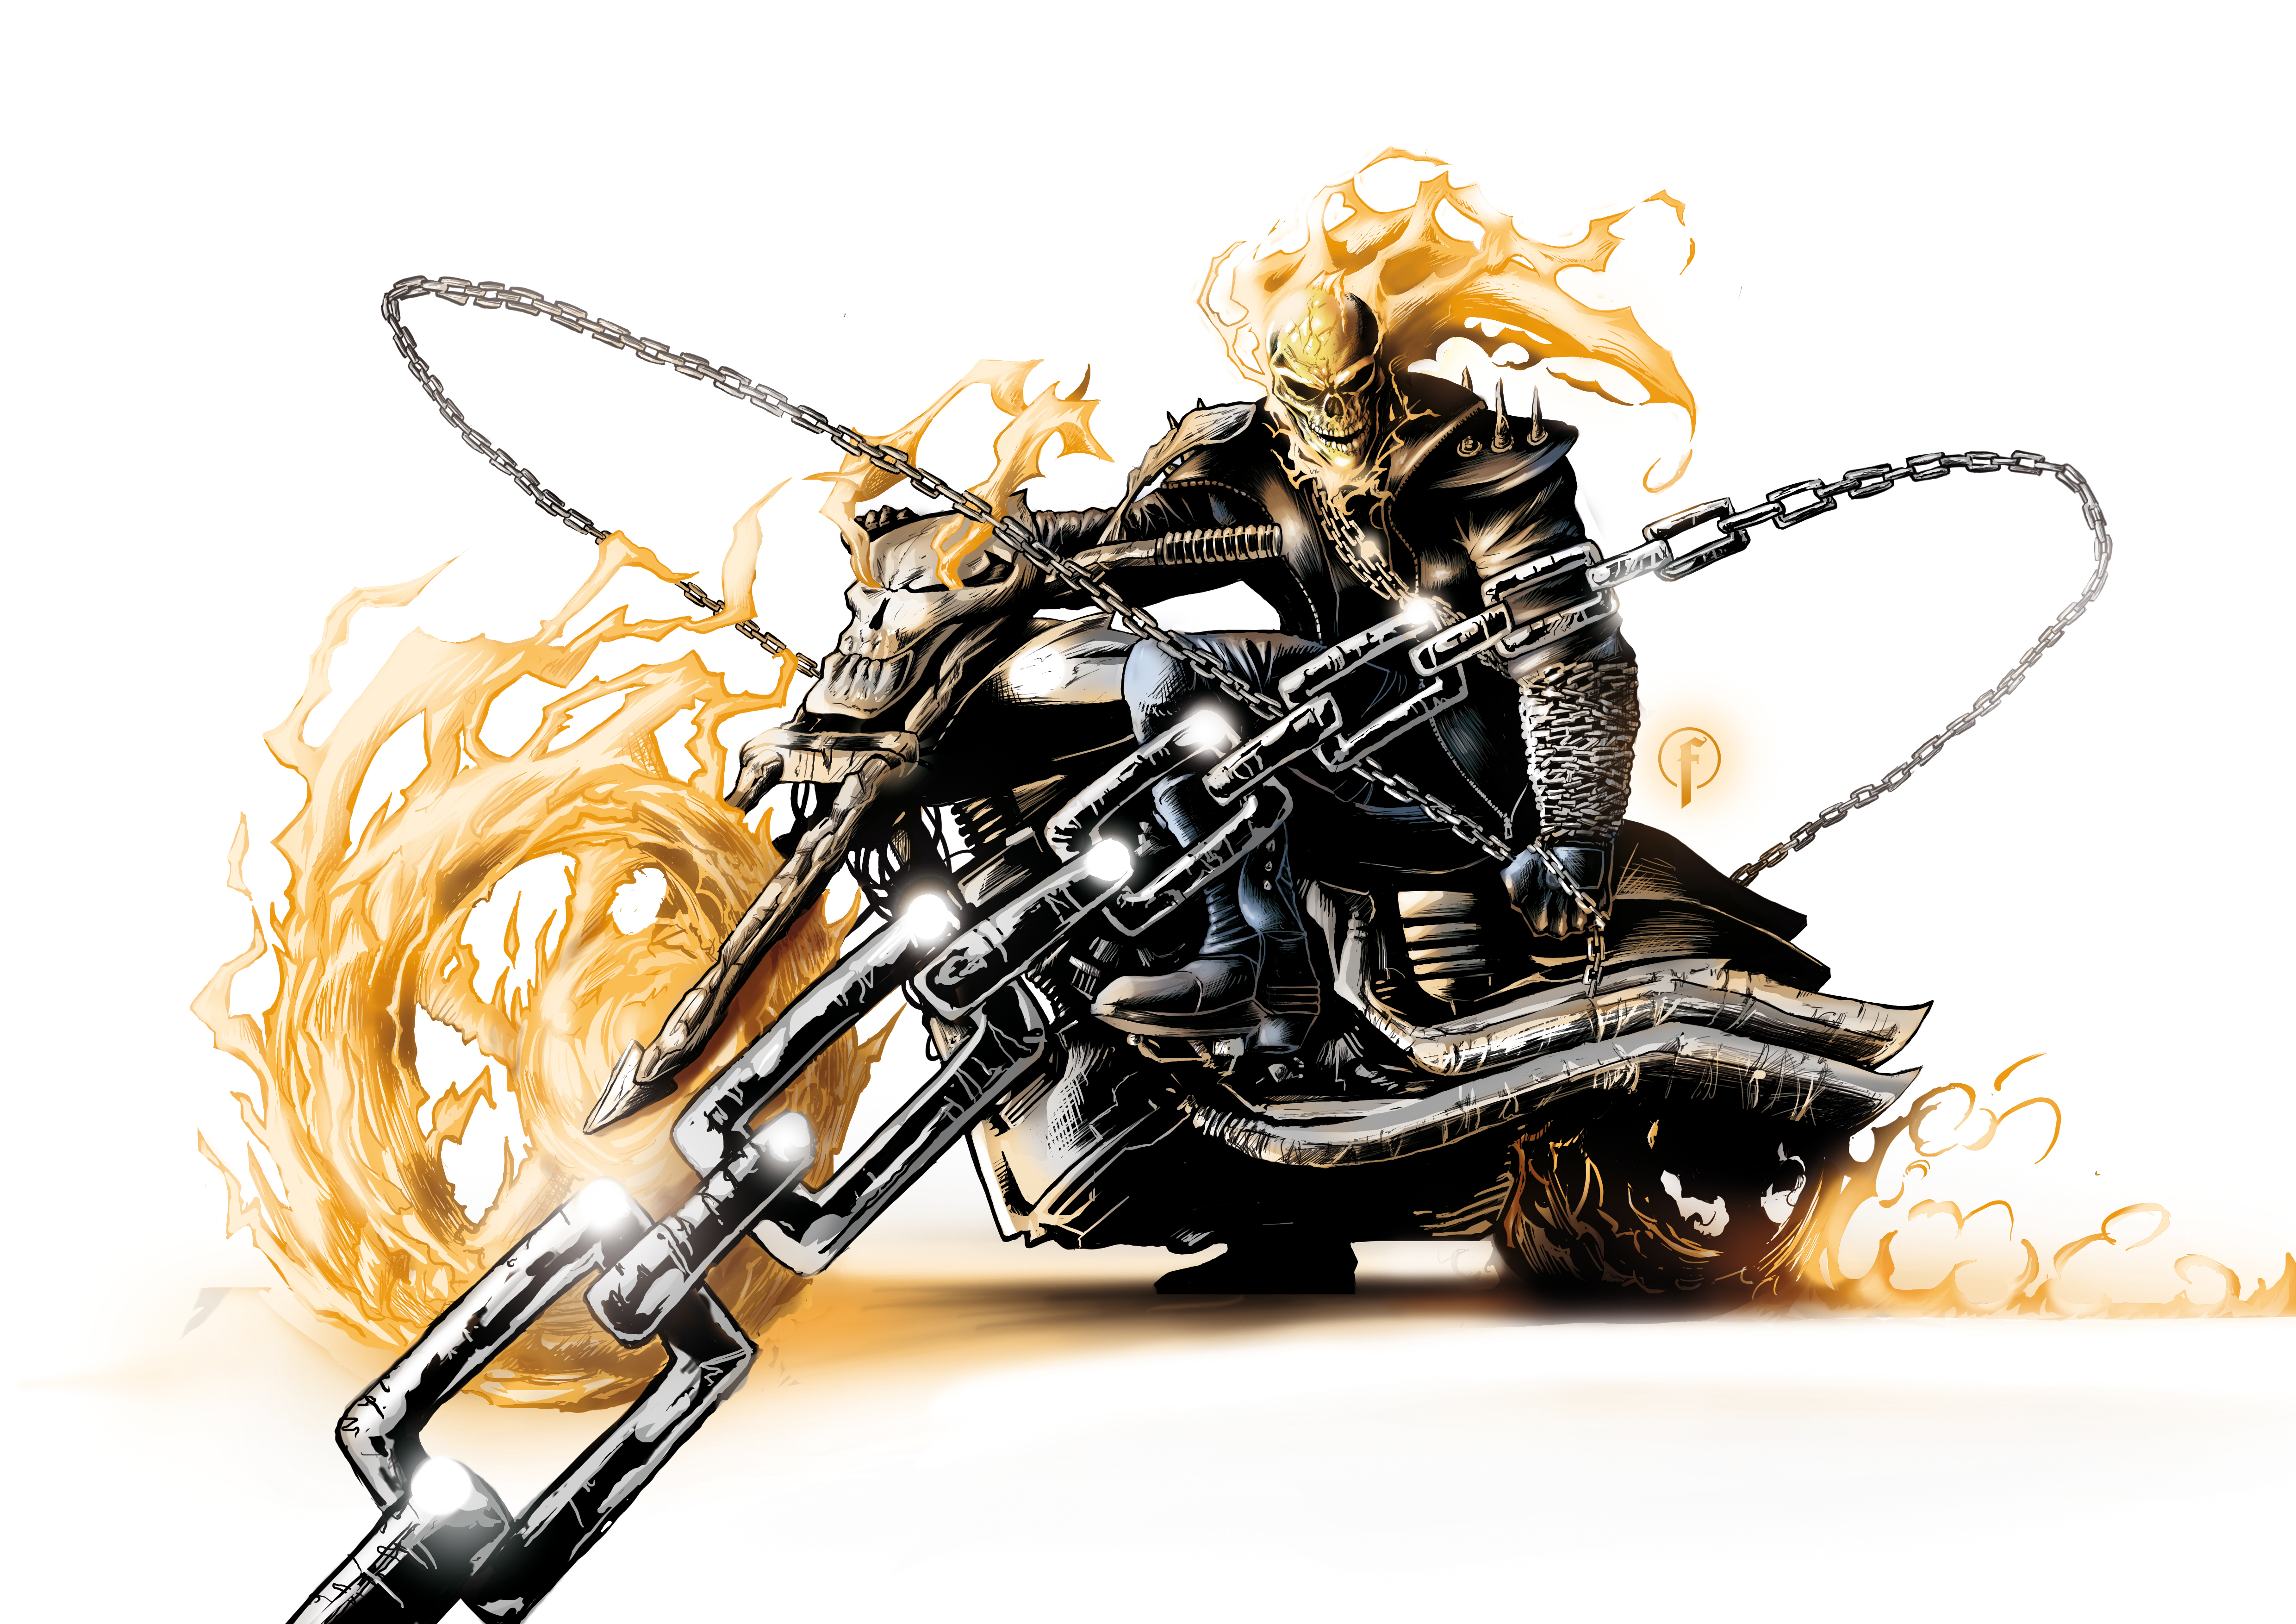 Ghost rider 2 wallpapers